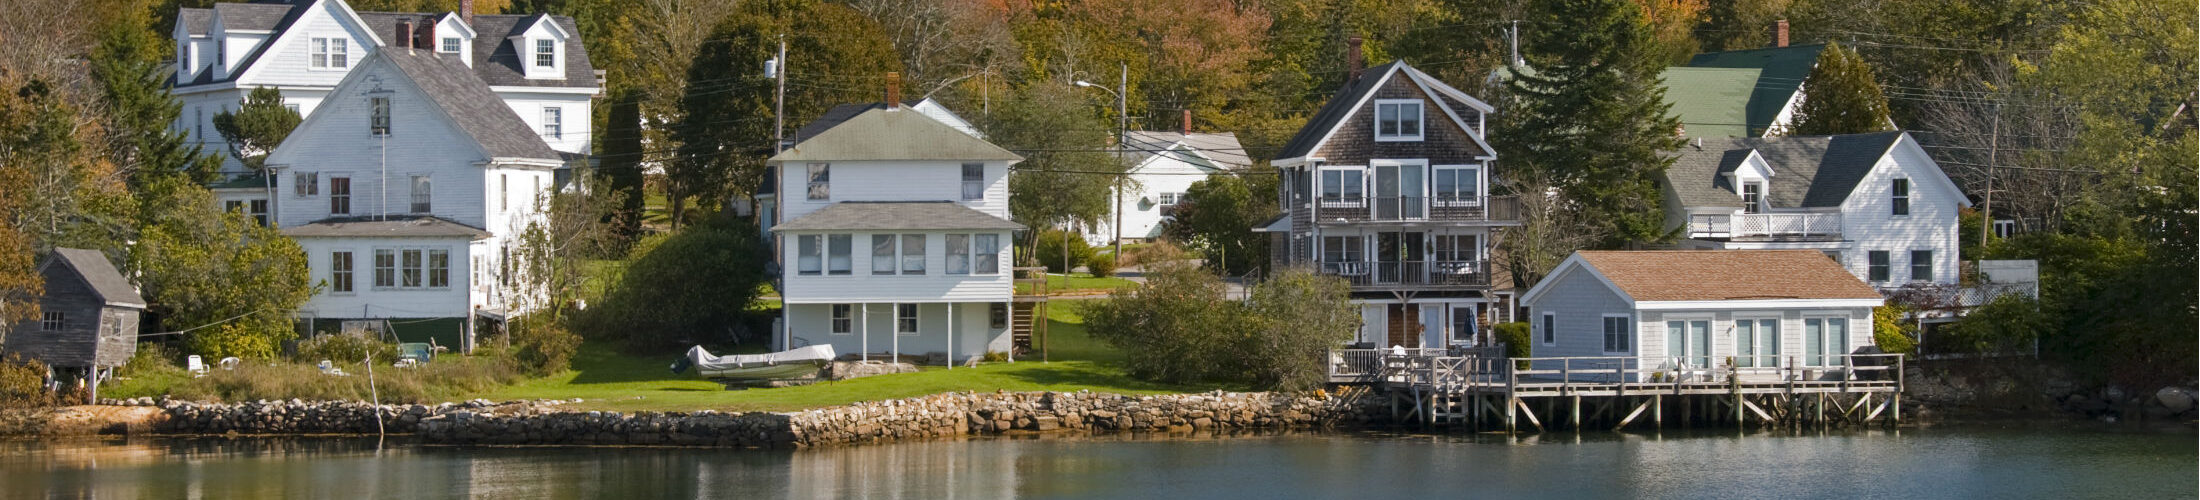 Lakefront homes in New England